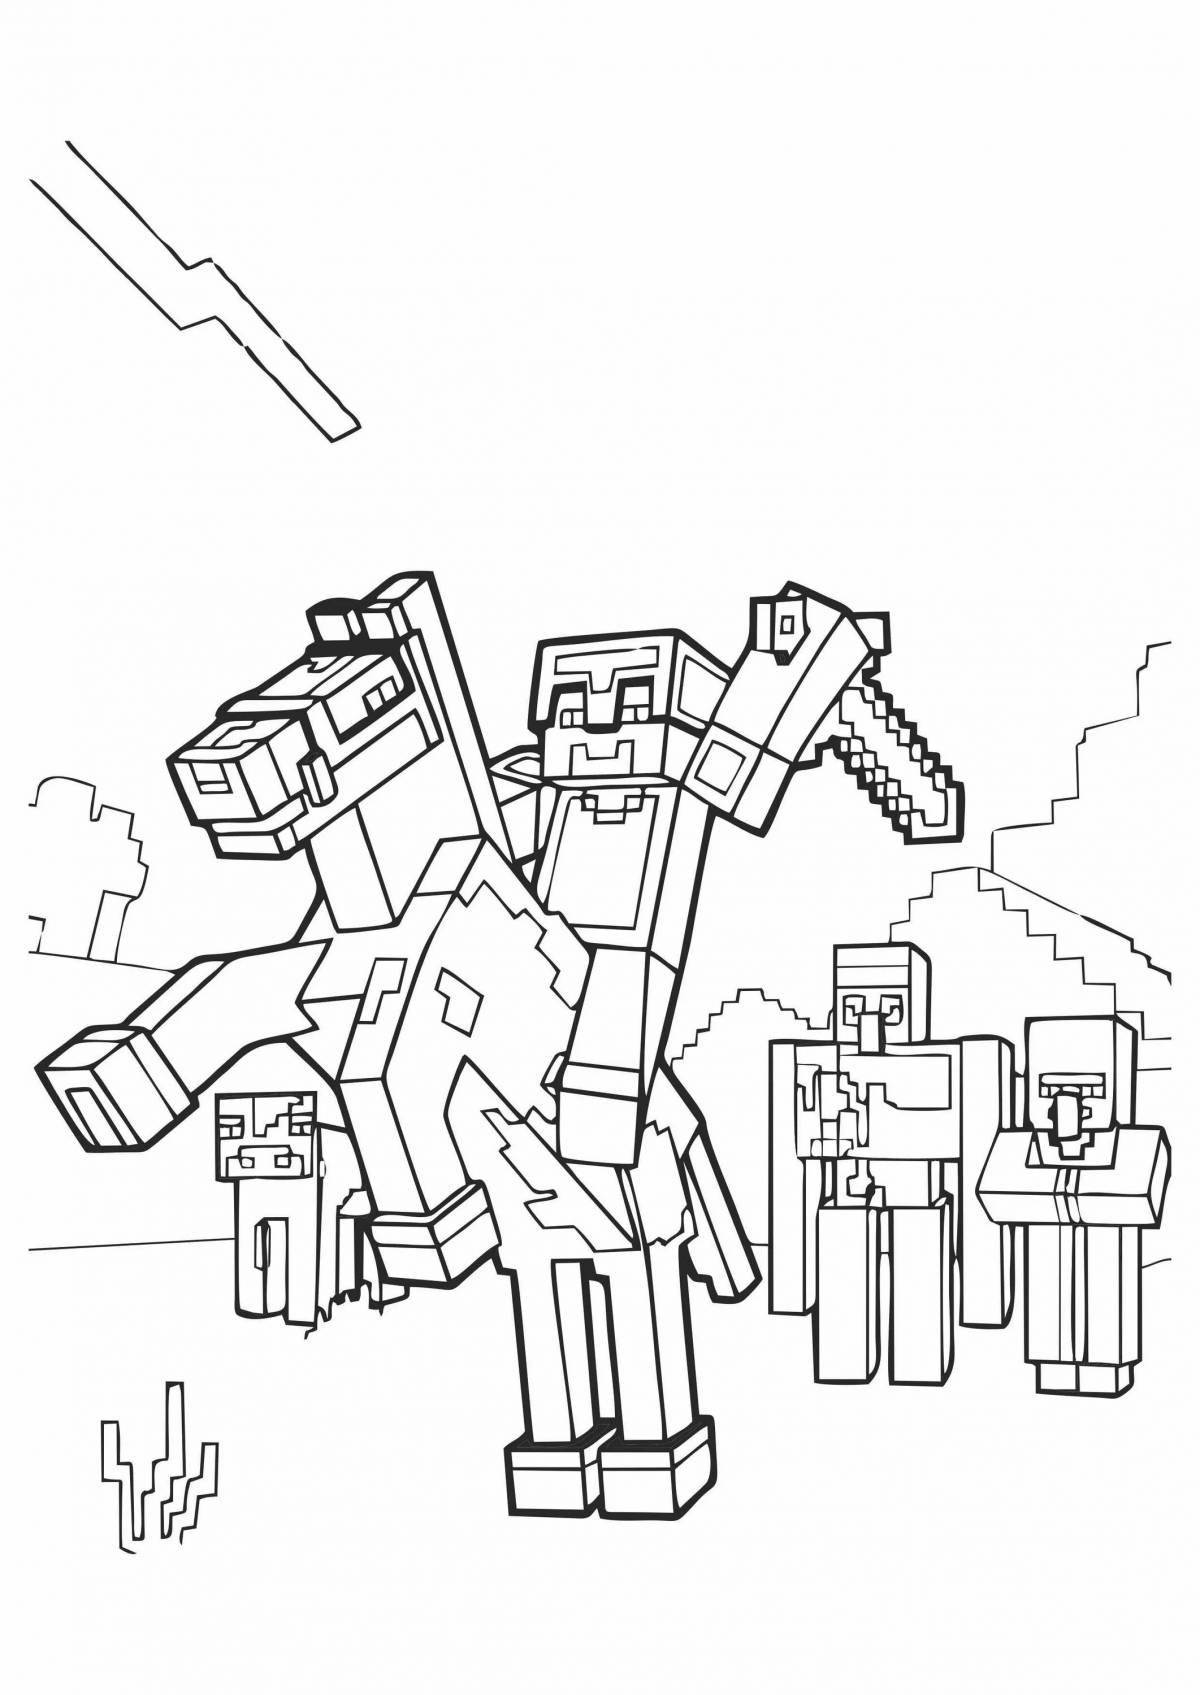 Impressive cool minecraft coloring book for boys